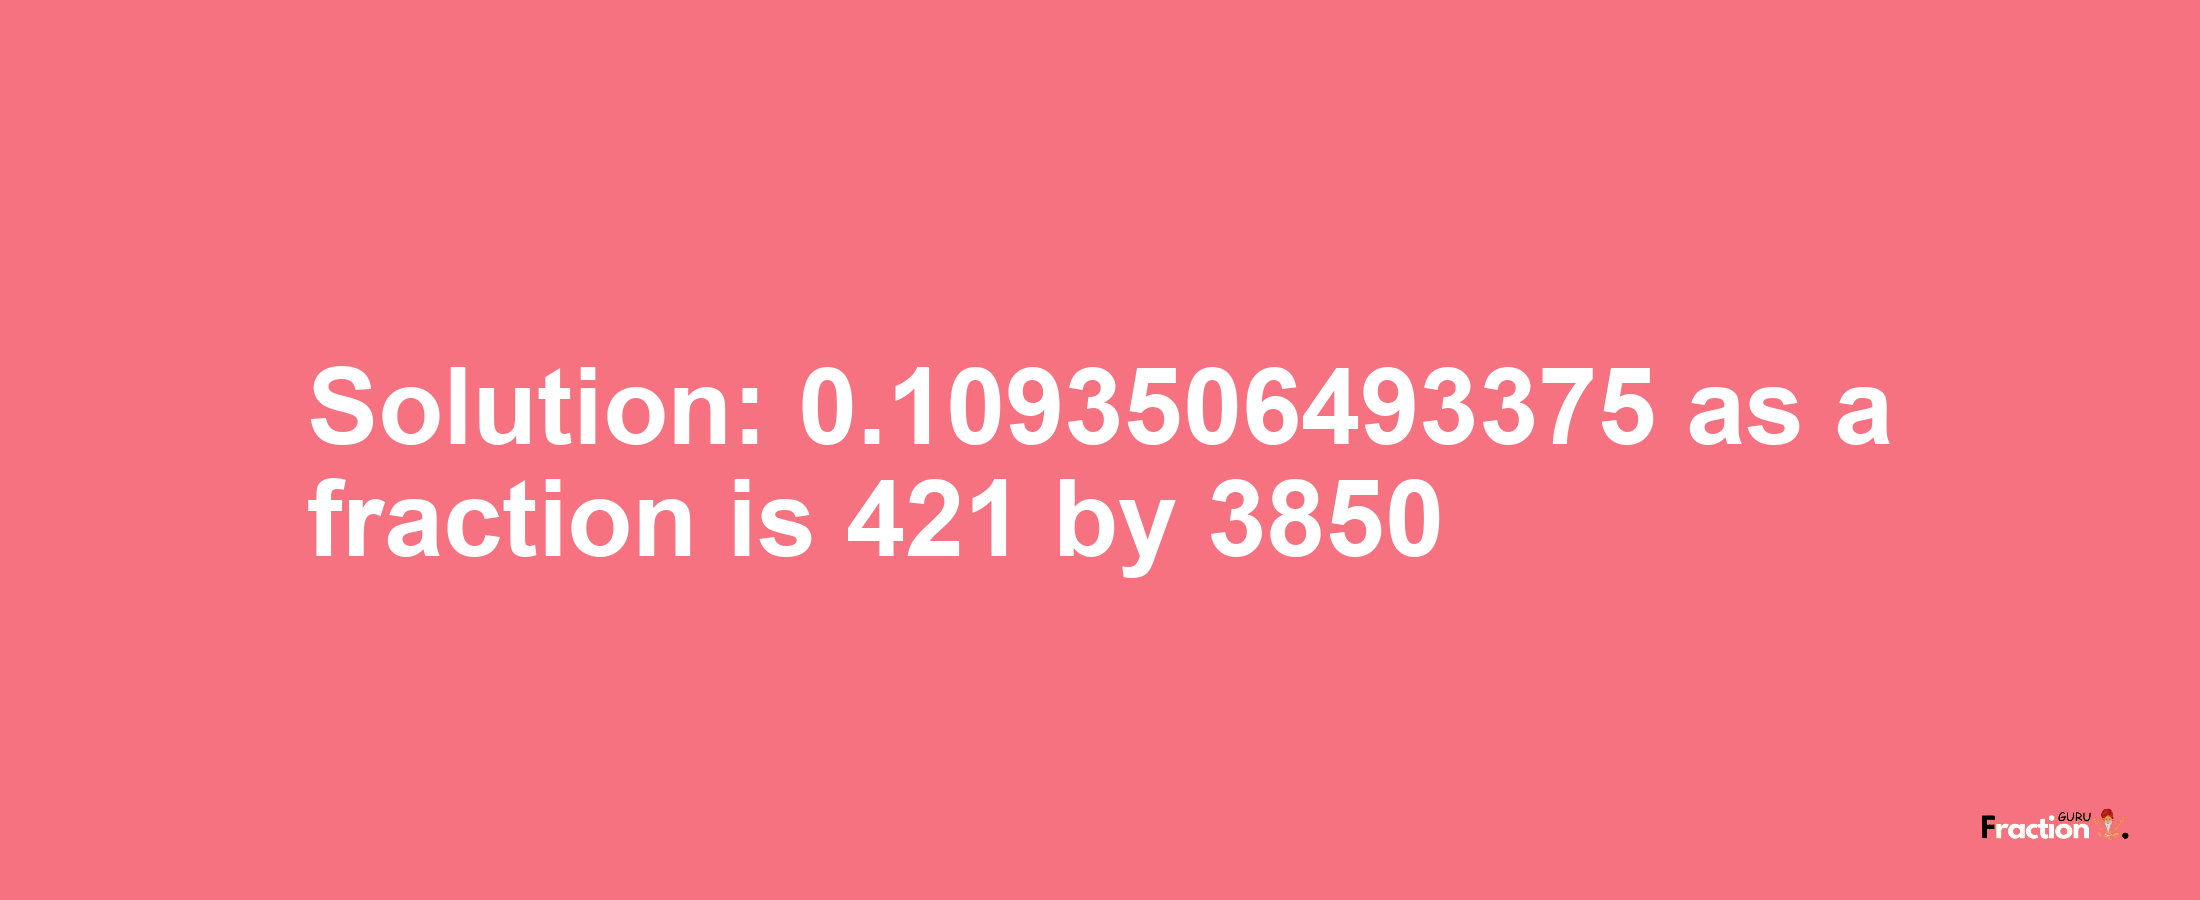 Solution:0.1093506493375 as a fraction is 421/3850